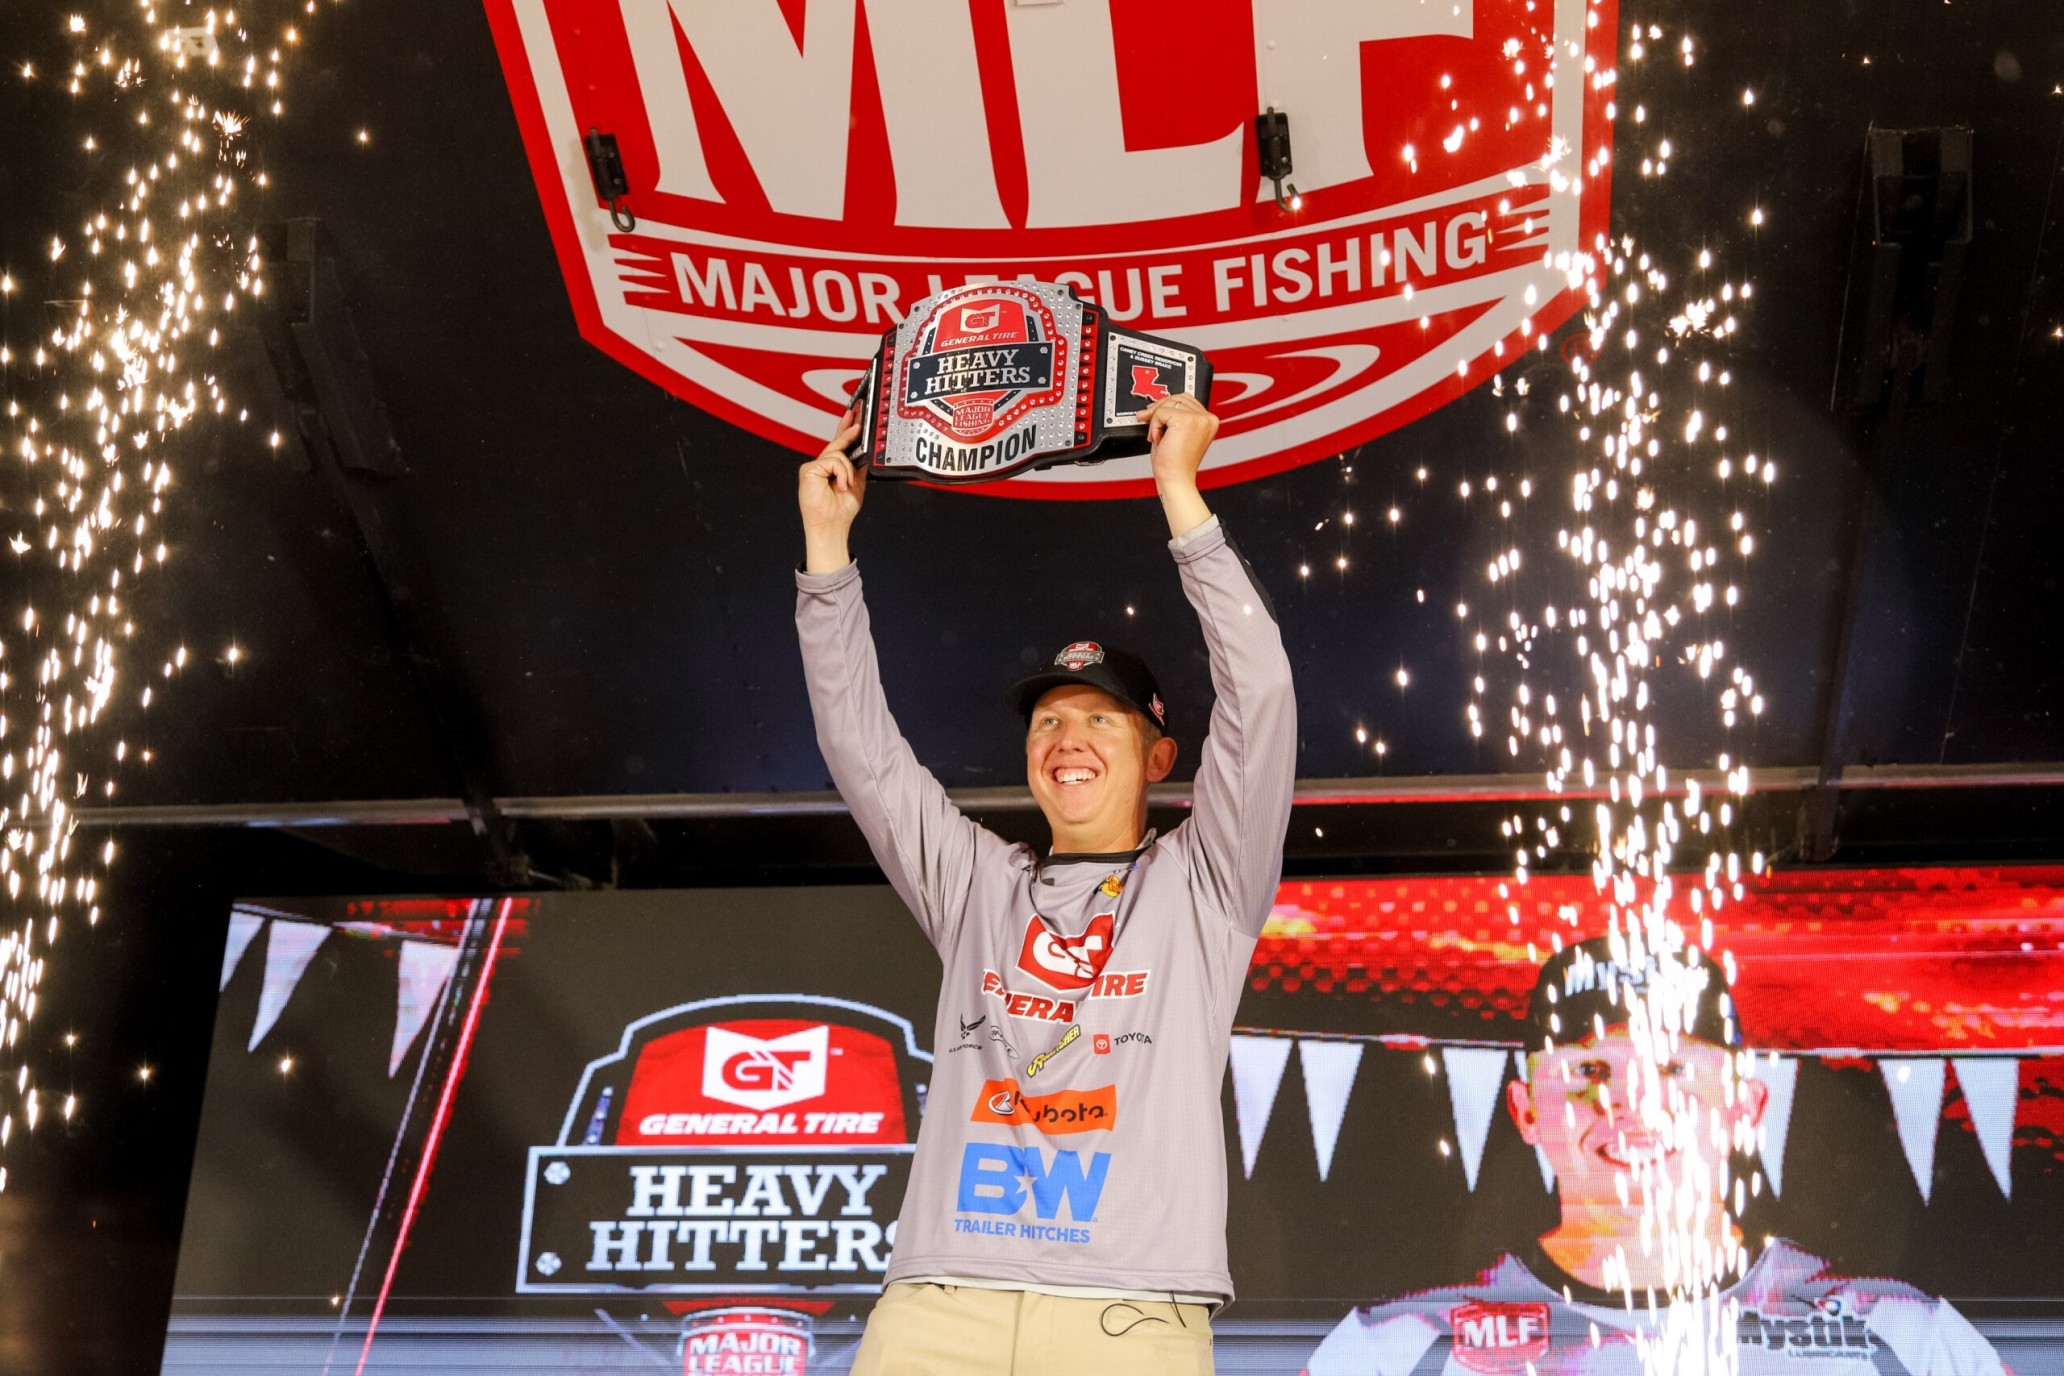 Jake Lawrence Leads Wire-to-Wire with Smallmouth, Wins MLF Toyota